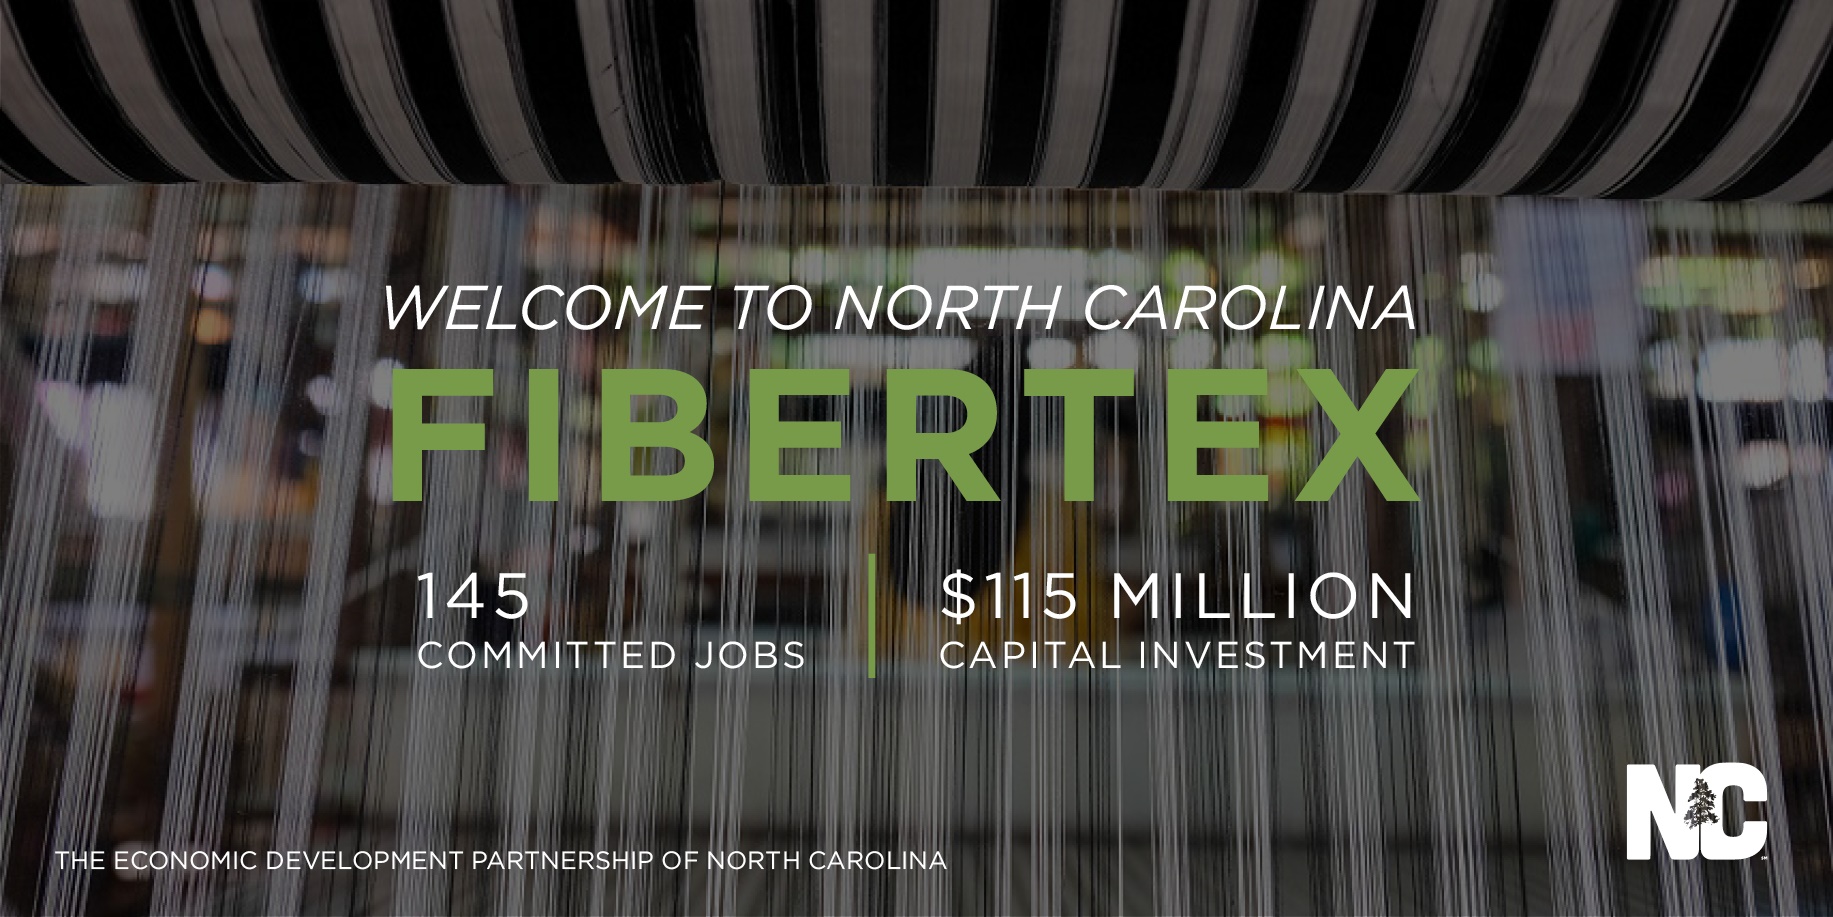 Danish Textile Manufacturer to Build 1st U.S. Plant in Asheboro, Creating 145 New Jobs